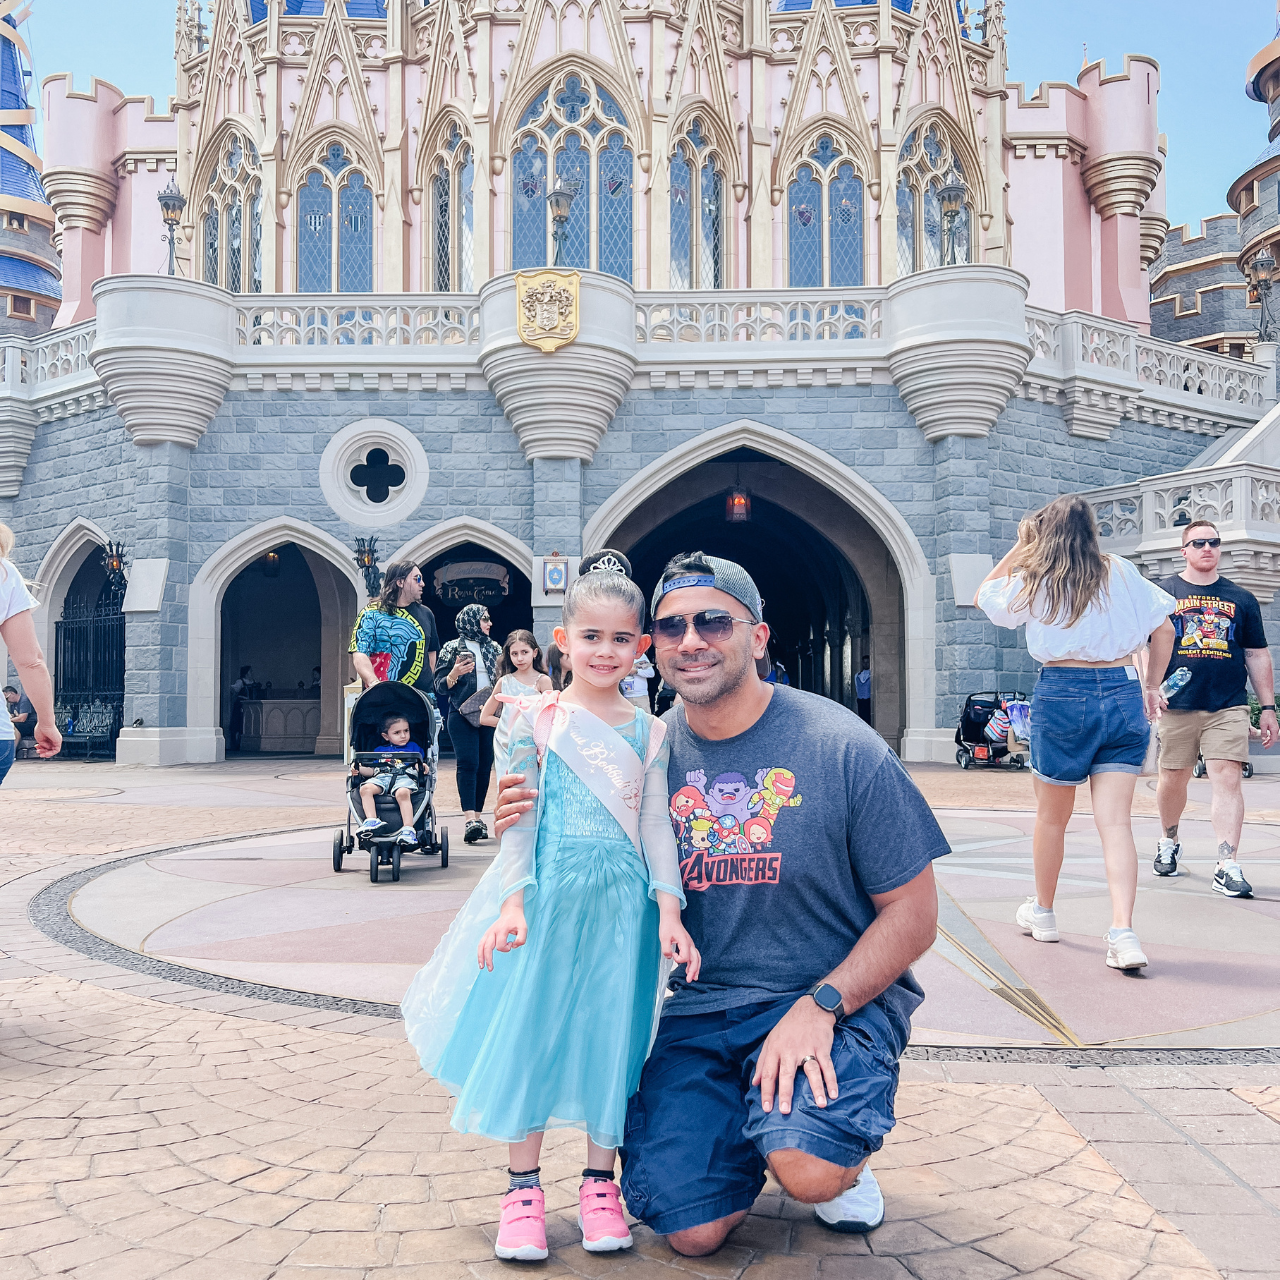 author Megan's daughter and husband in front of cinderella's castle after going to the bibbidi bobbidi boutique